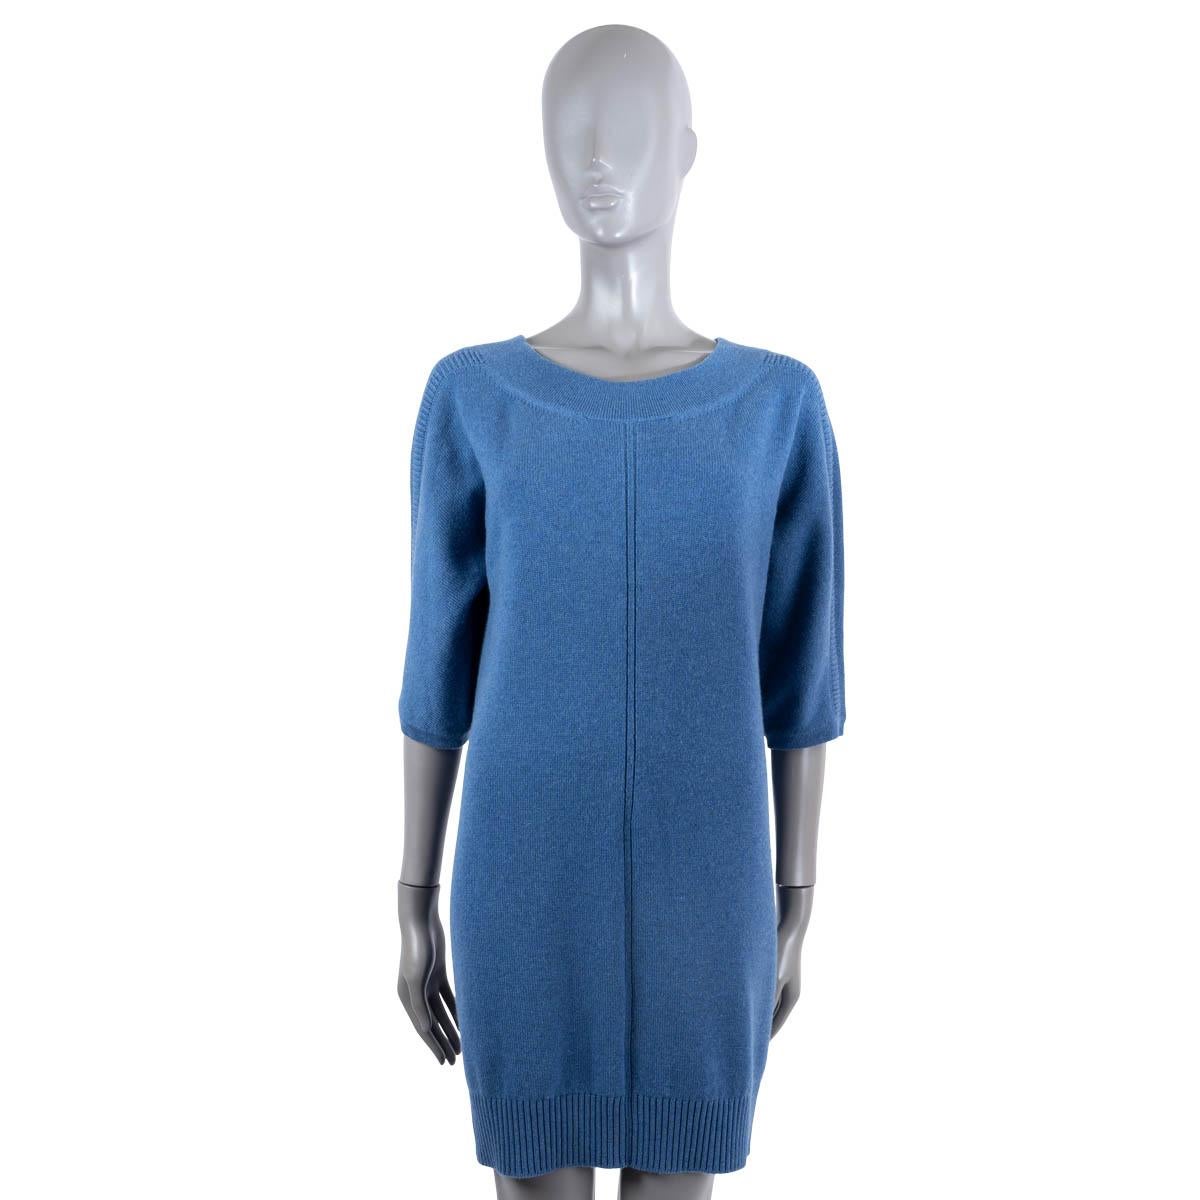 HERMES blue cashmere HALF SLEEVE KNIT Dress 34 XS In Excellent Condition For Sale In Zürich, CH